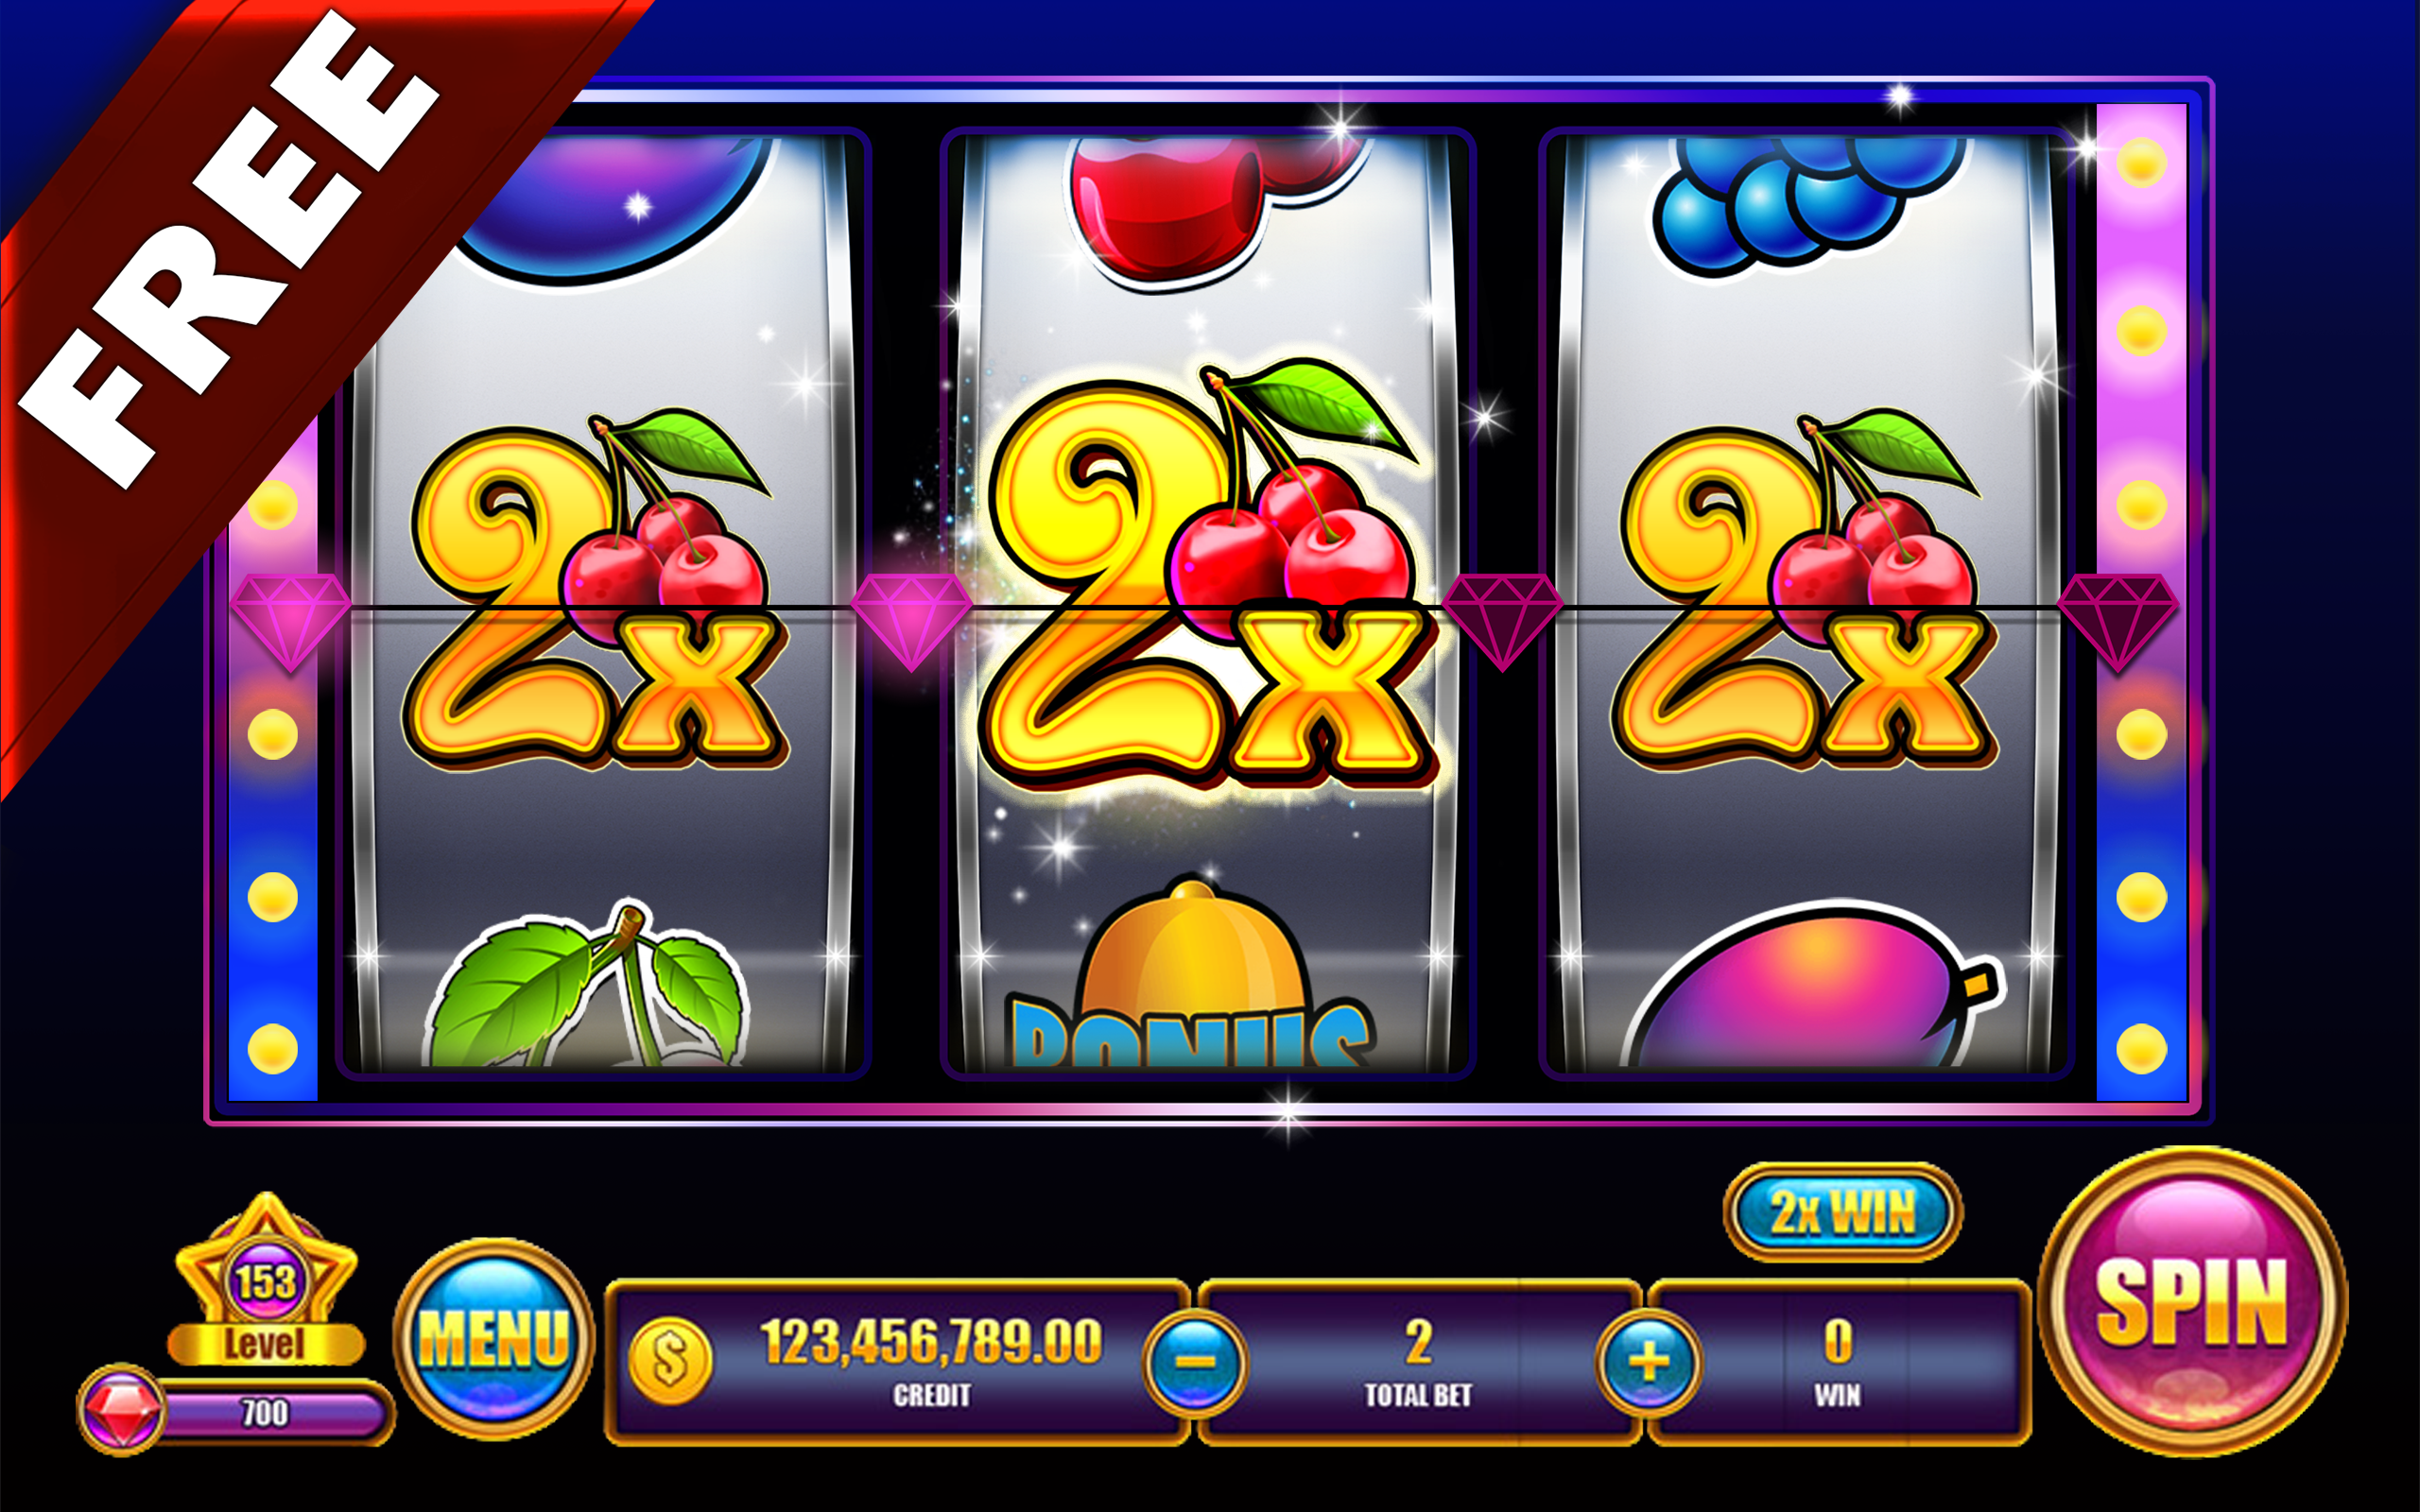 Play Online Slots Uk &#8211; Try Our Slot Games At 32red